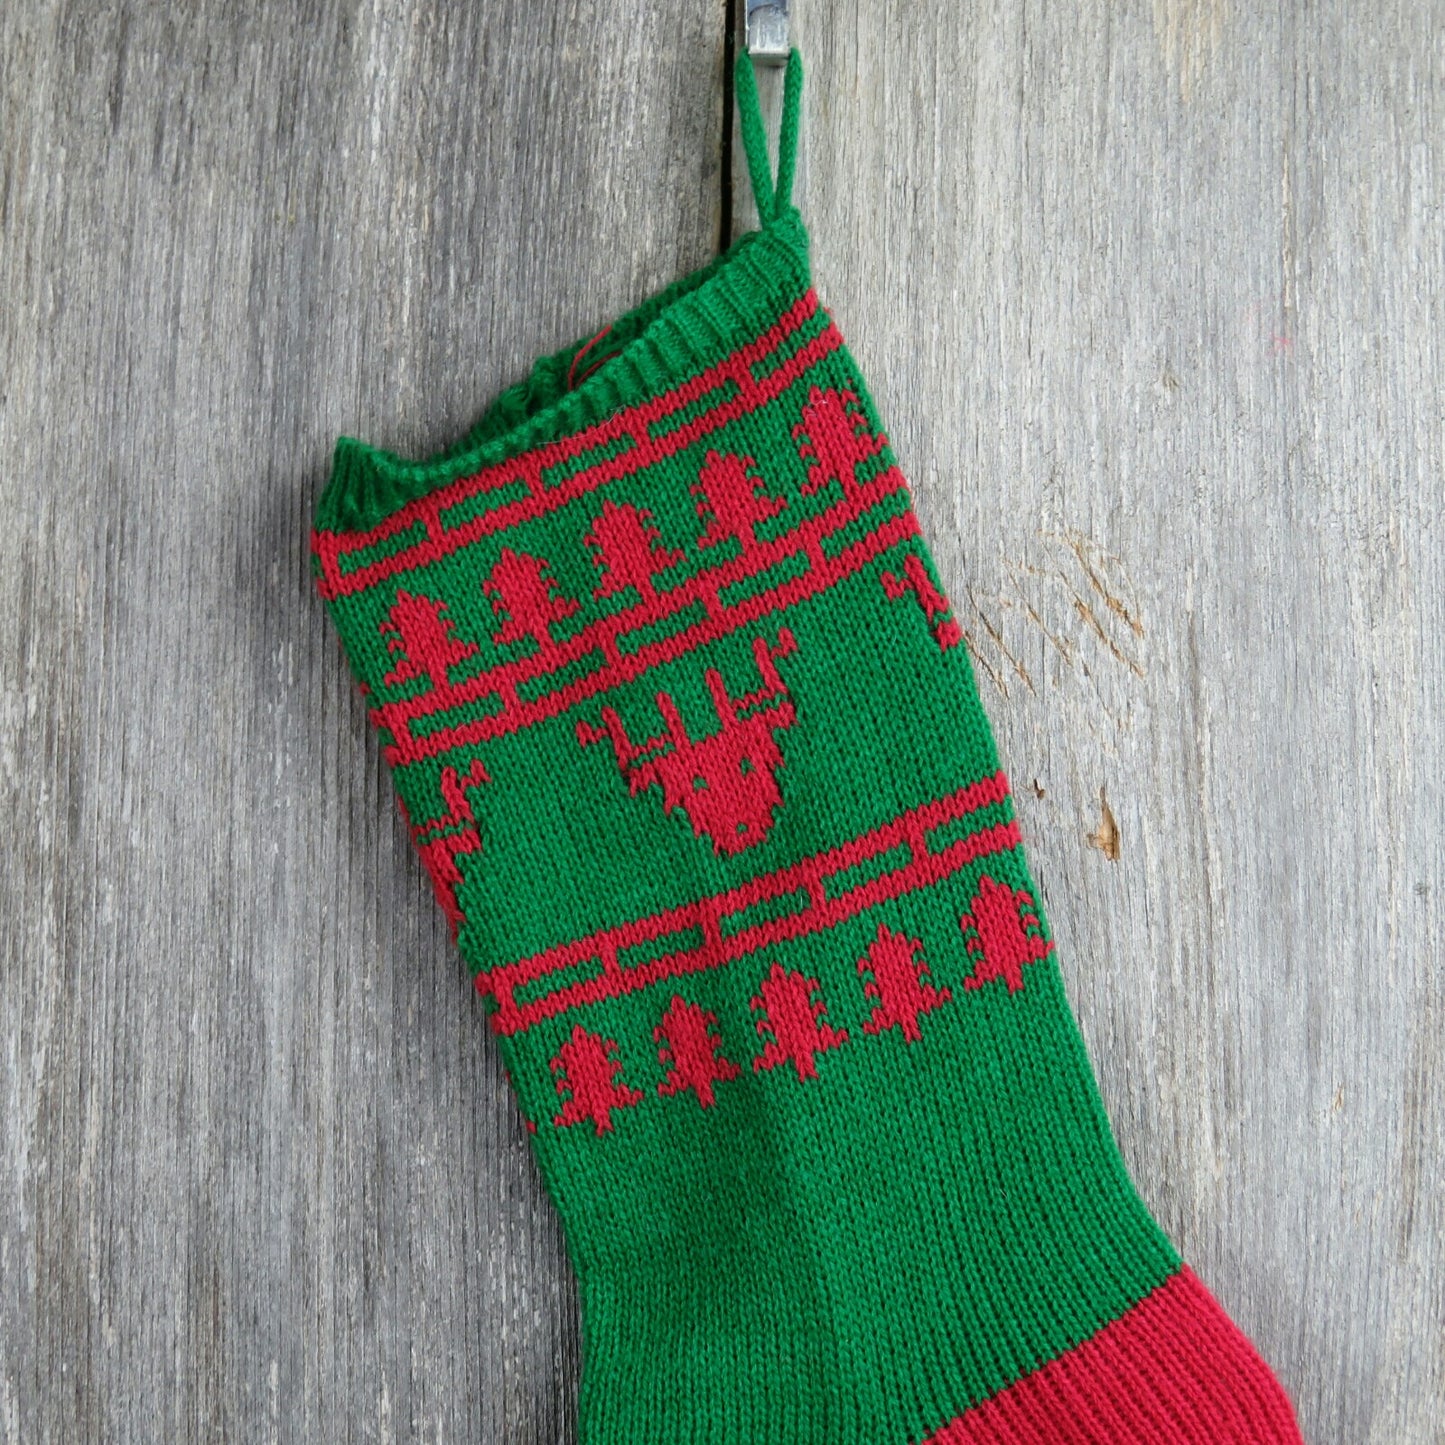 Vintage Reindeer Stocking Knitted Knit Christmas Tree Red Green - At Grandma's Table